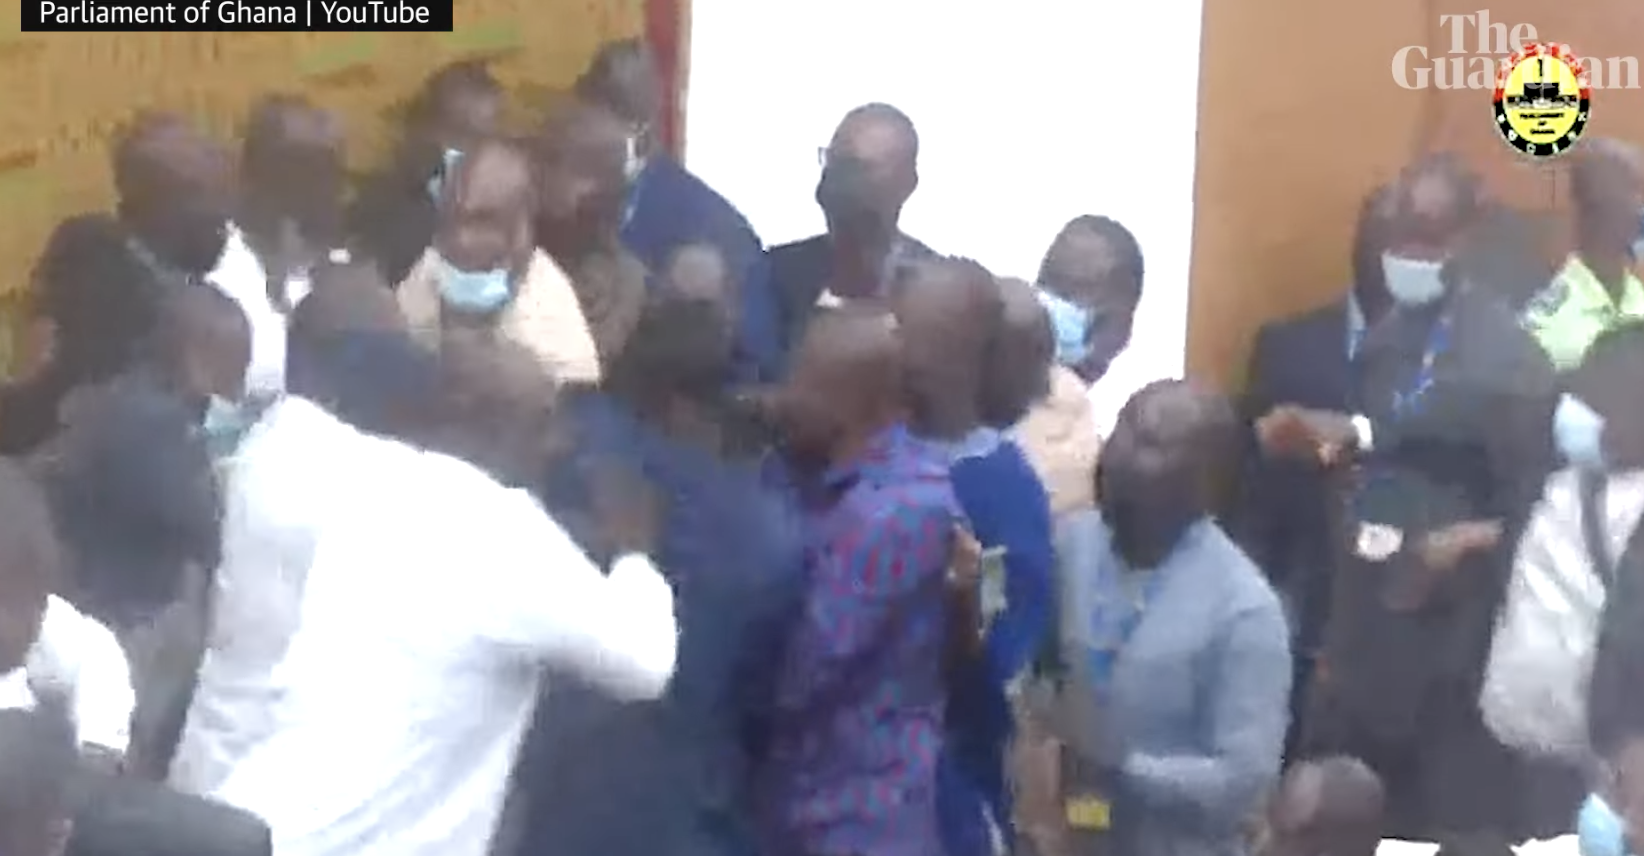 Ghana Parliament Gets Into A Brawl Over New Tax Proposal